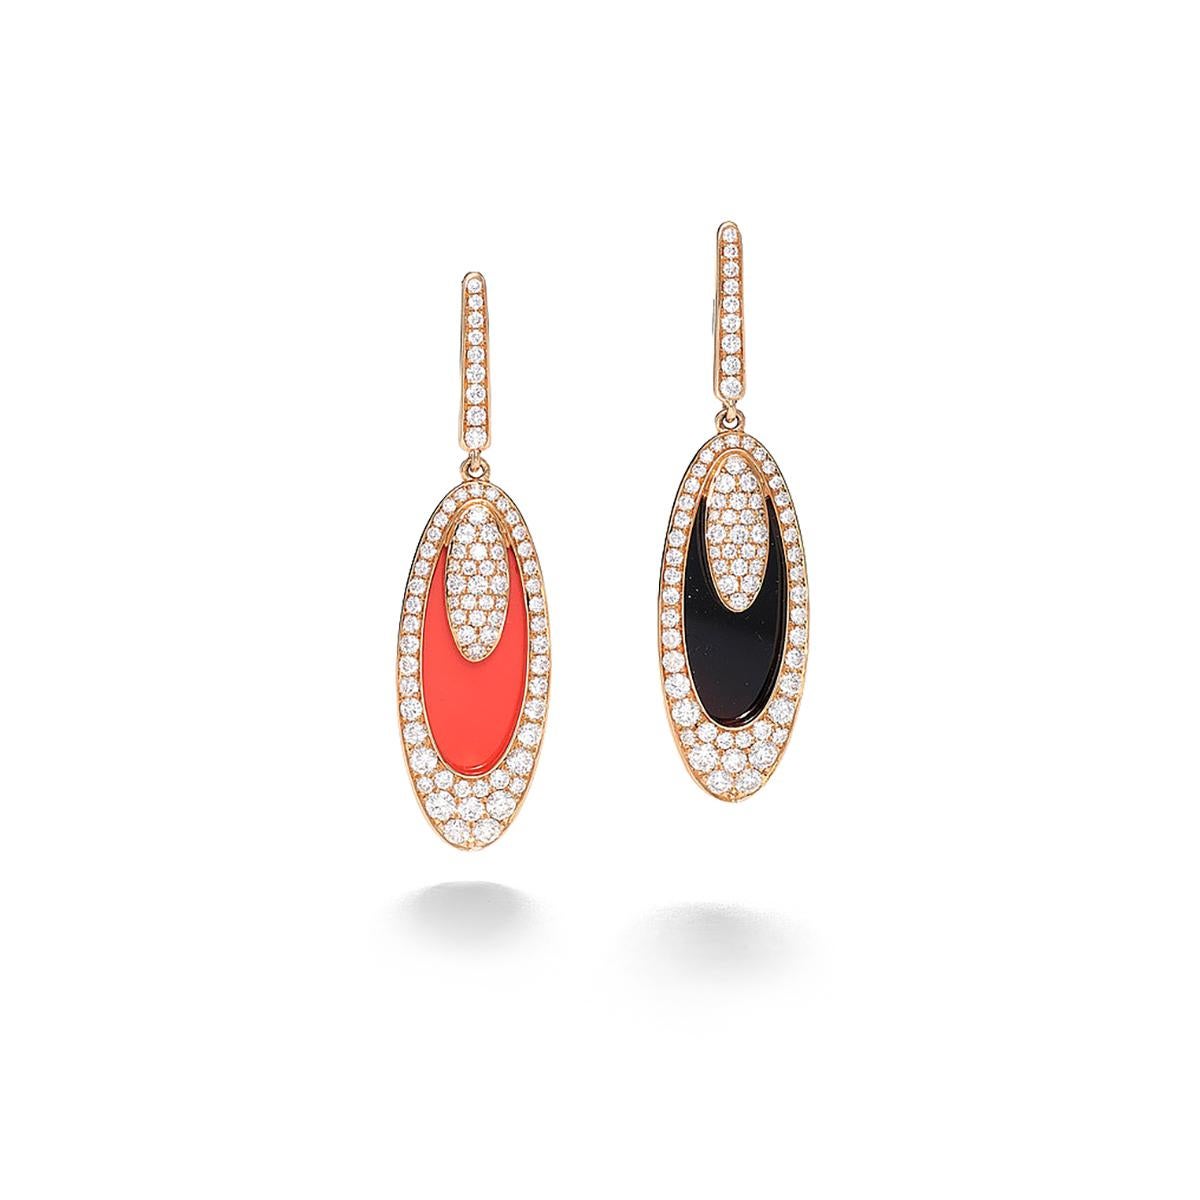 Round Cut Diamond Earrings with Onyx and Coral